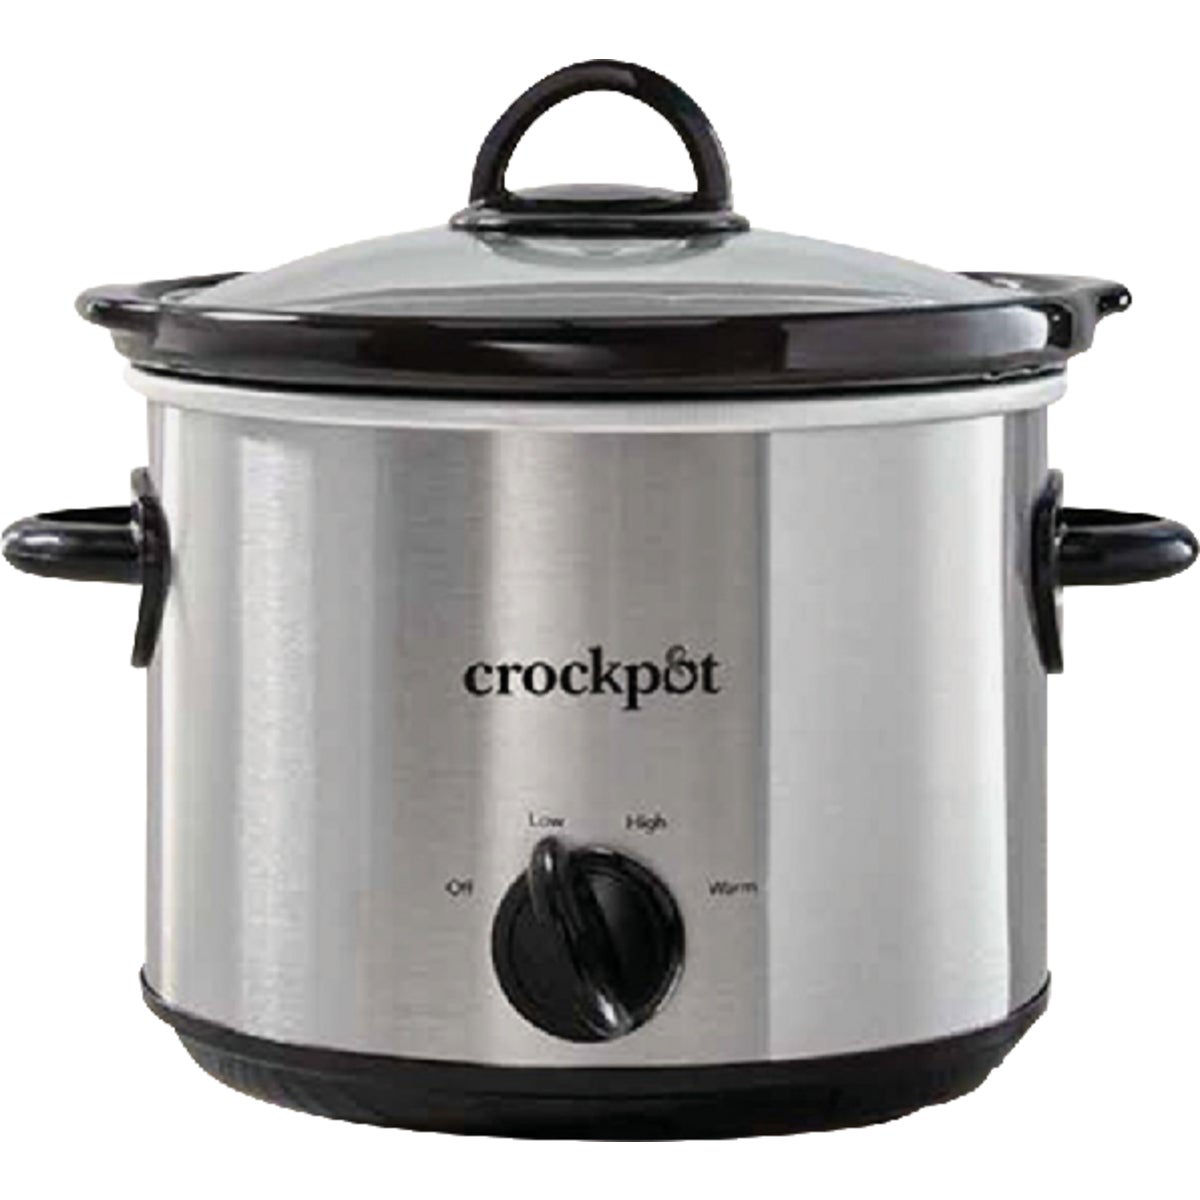 Crock-Pot SCR300-SS Stainless Steel 3-Quart Round Manual Slow